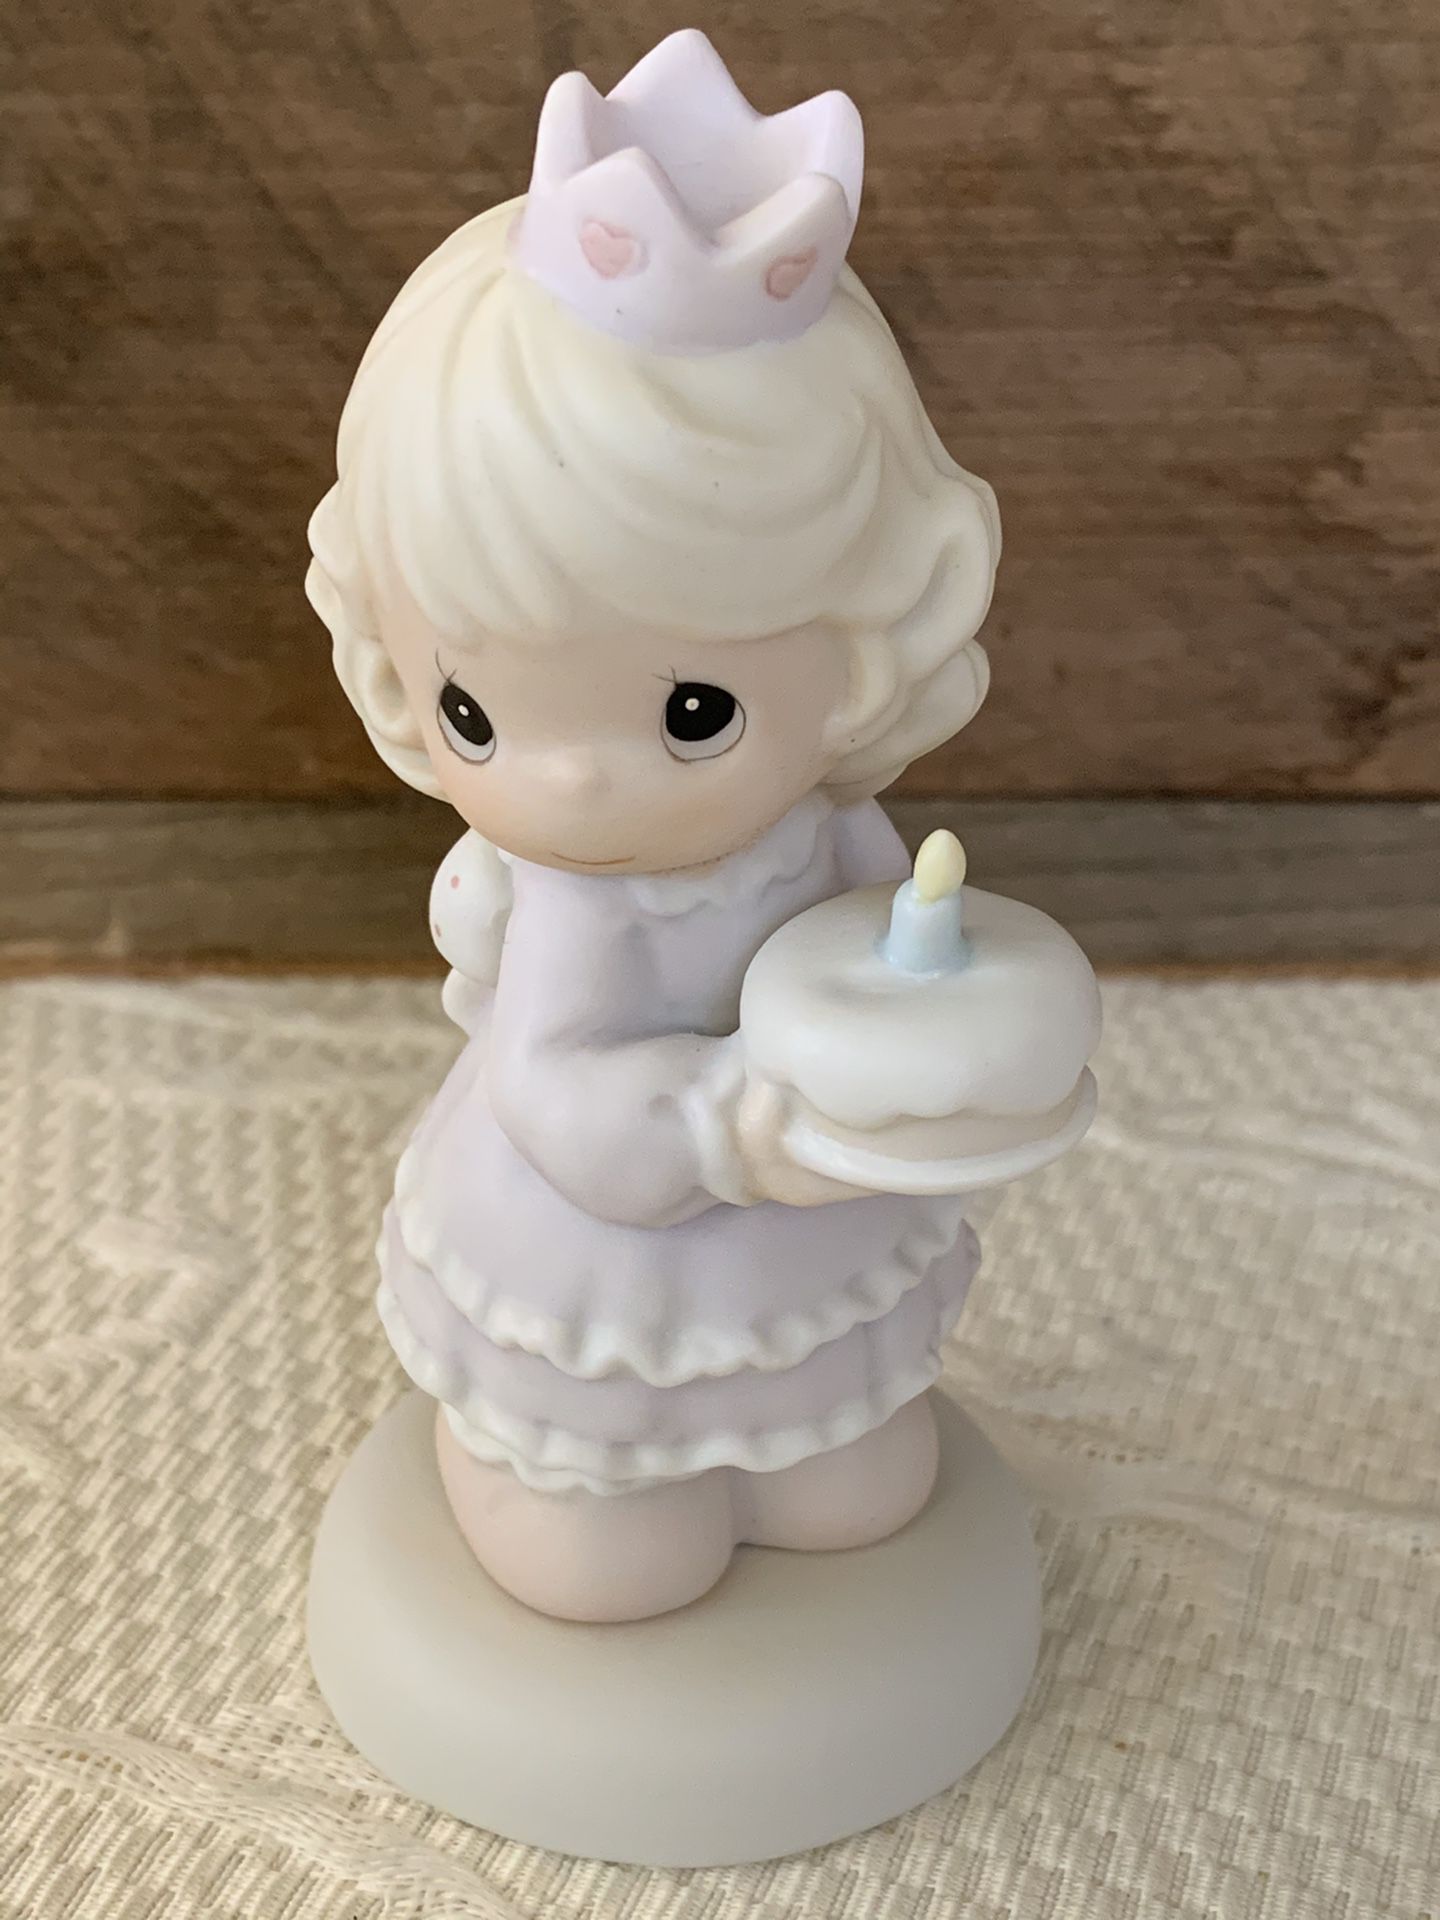 Precious Moment Porcelain 1996 “Birthday Wishes With Hugs & Kisses” Figurine